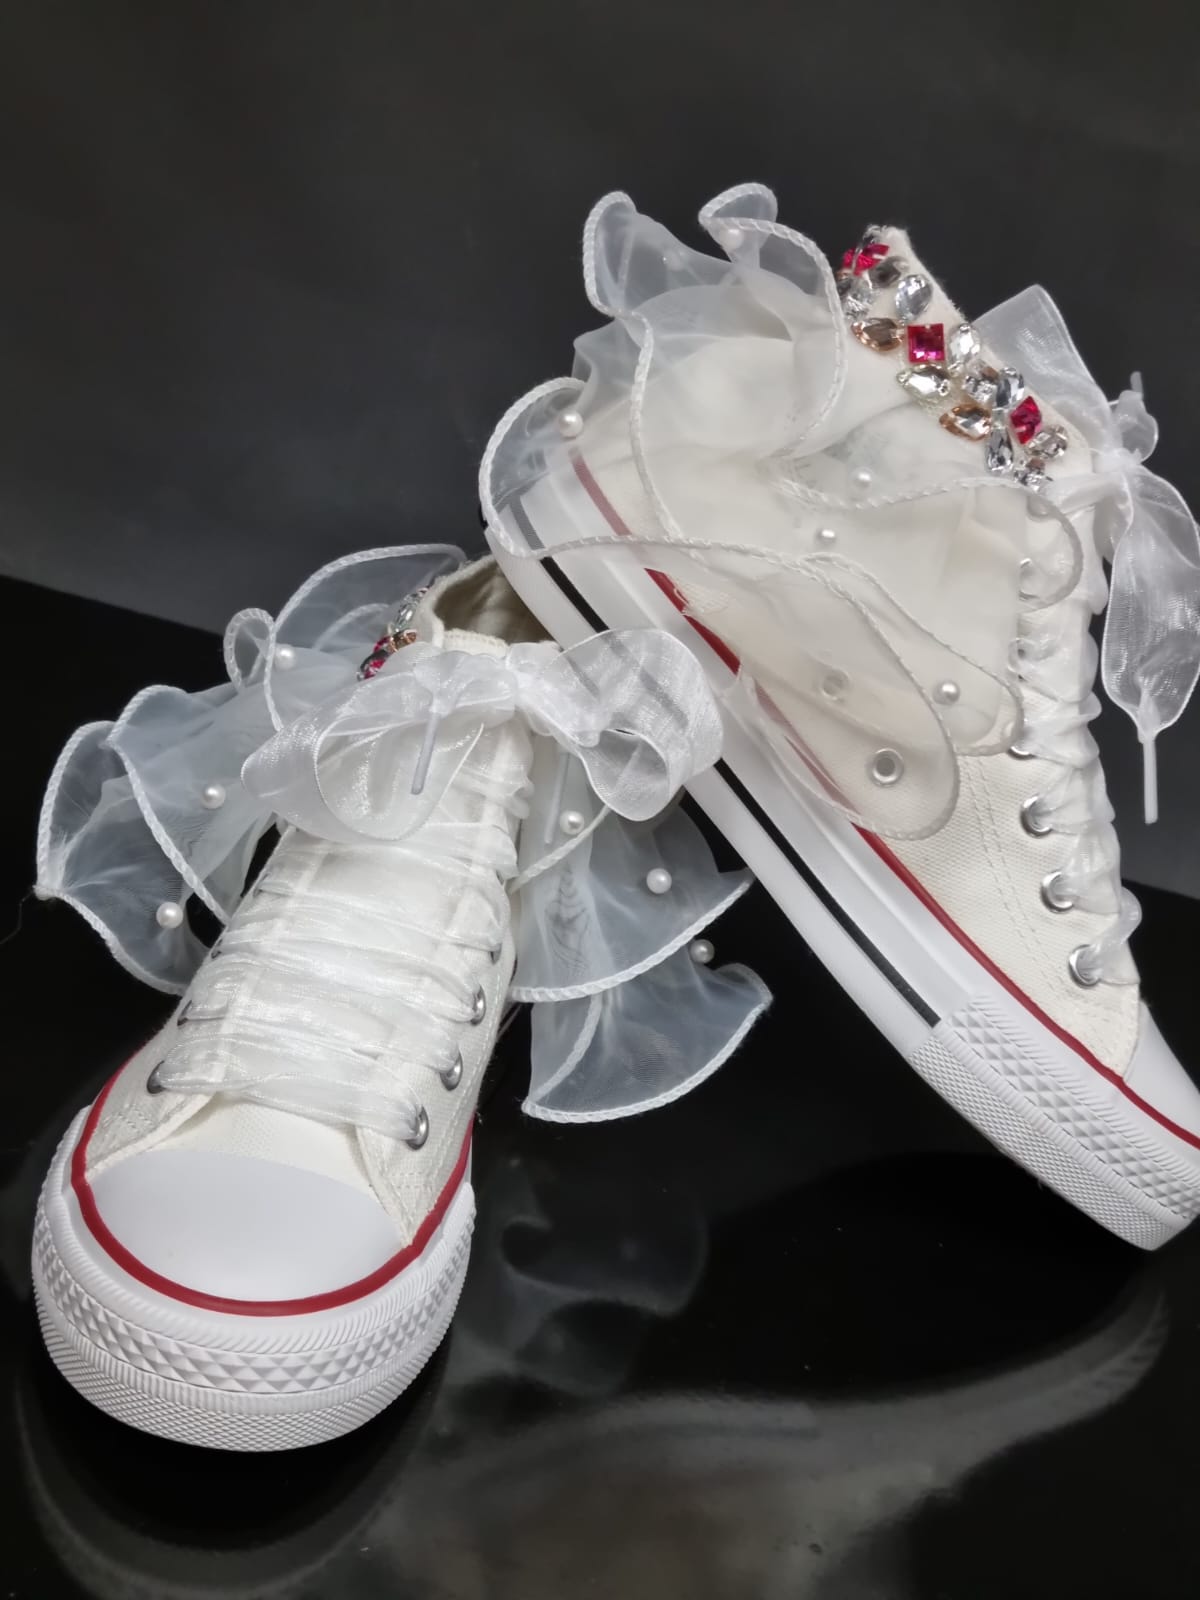 cocobee-White Converse Shoes with Pearls and Sparkly Rhinestones-2